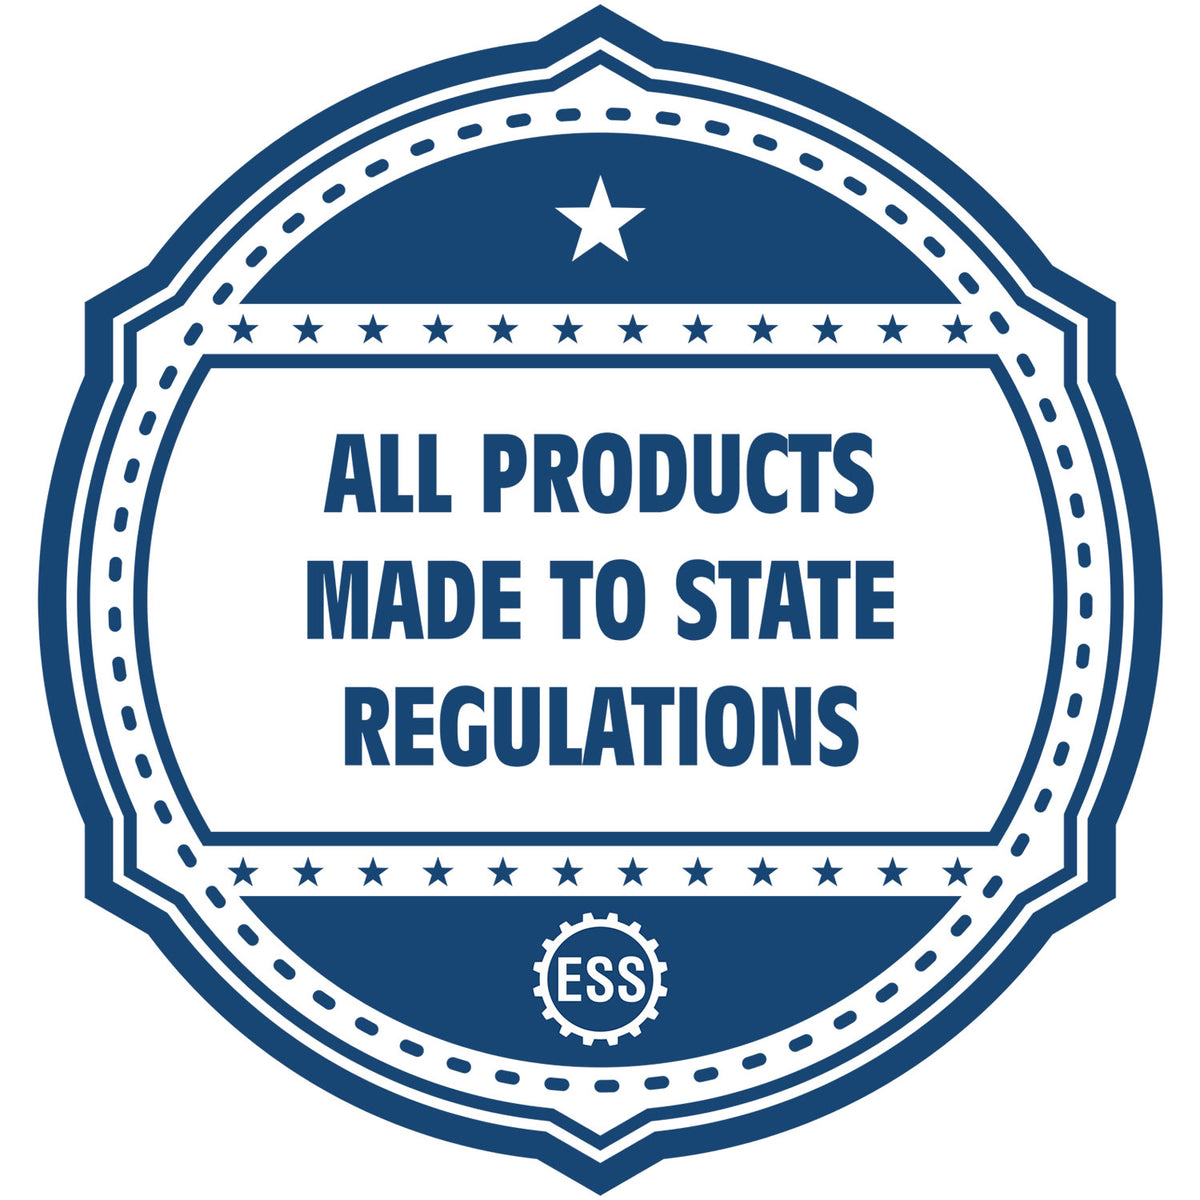 A blue icon or badge for the Montana Professional Geologist Seal Stamp showing that this product is made in compliance with state regulations.